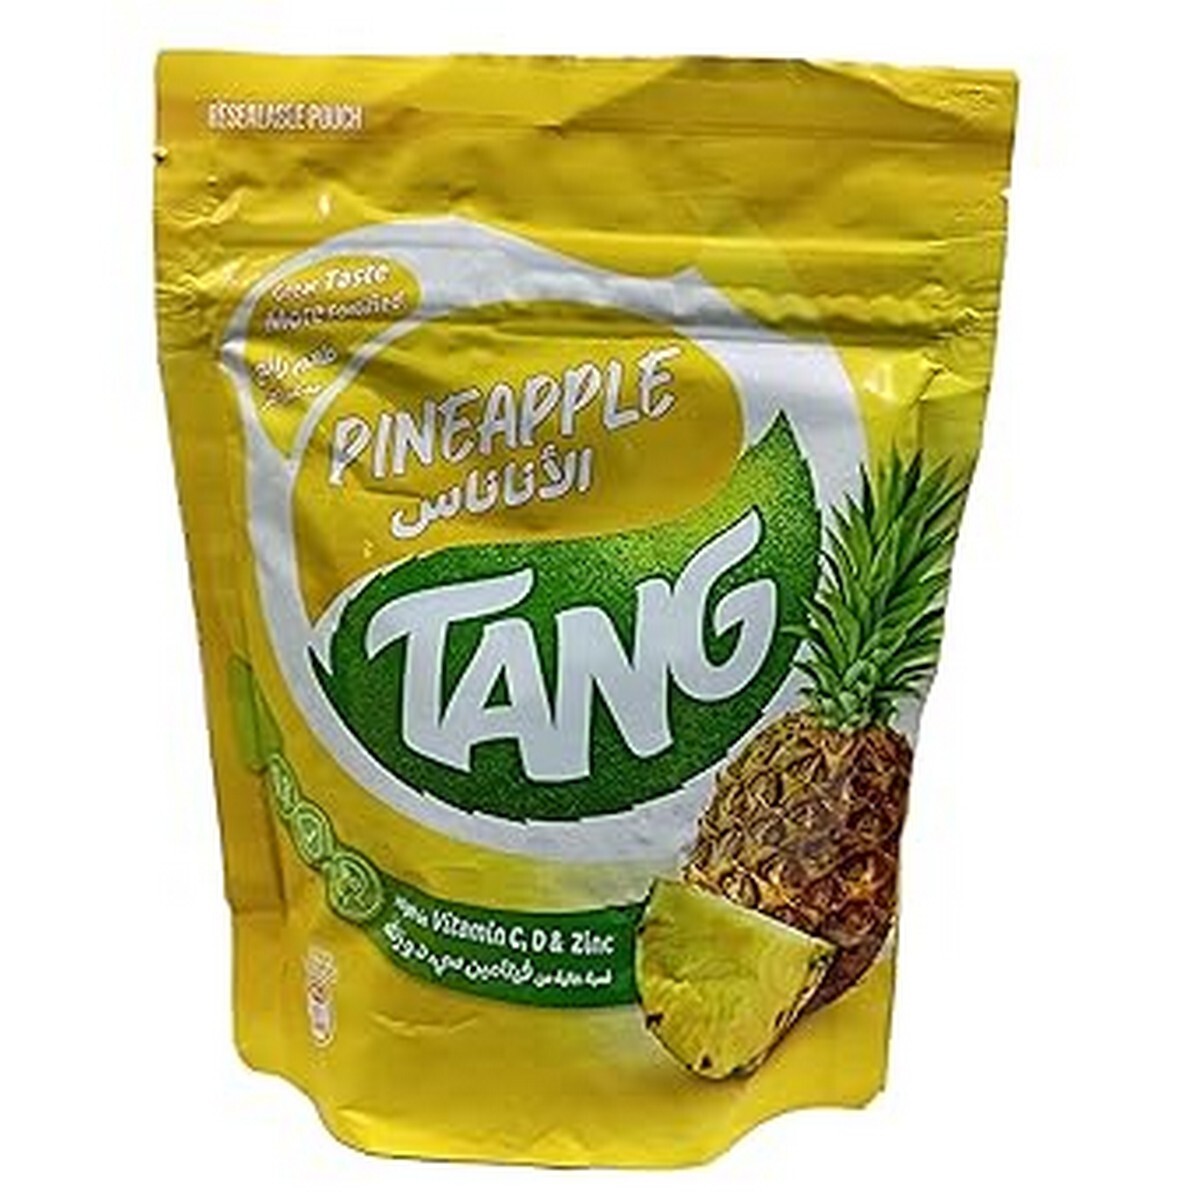 Tang Pineapple Pouch 375Gm